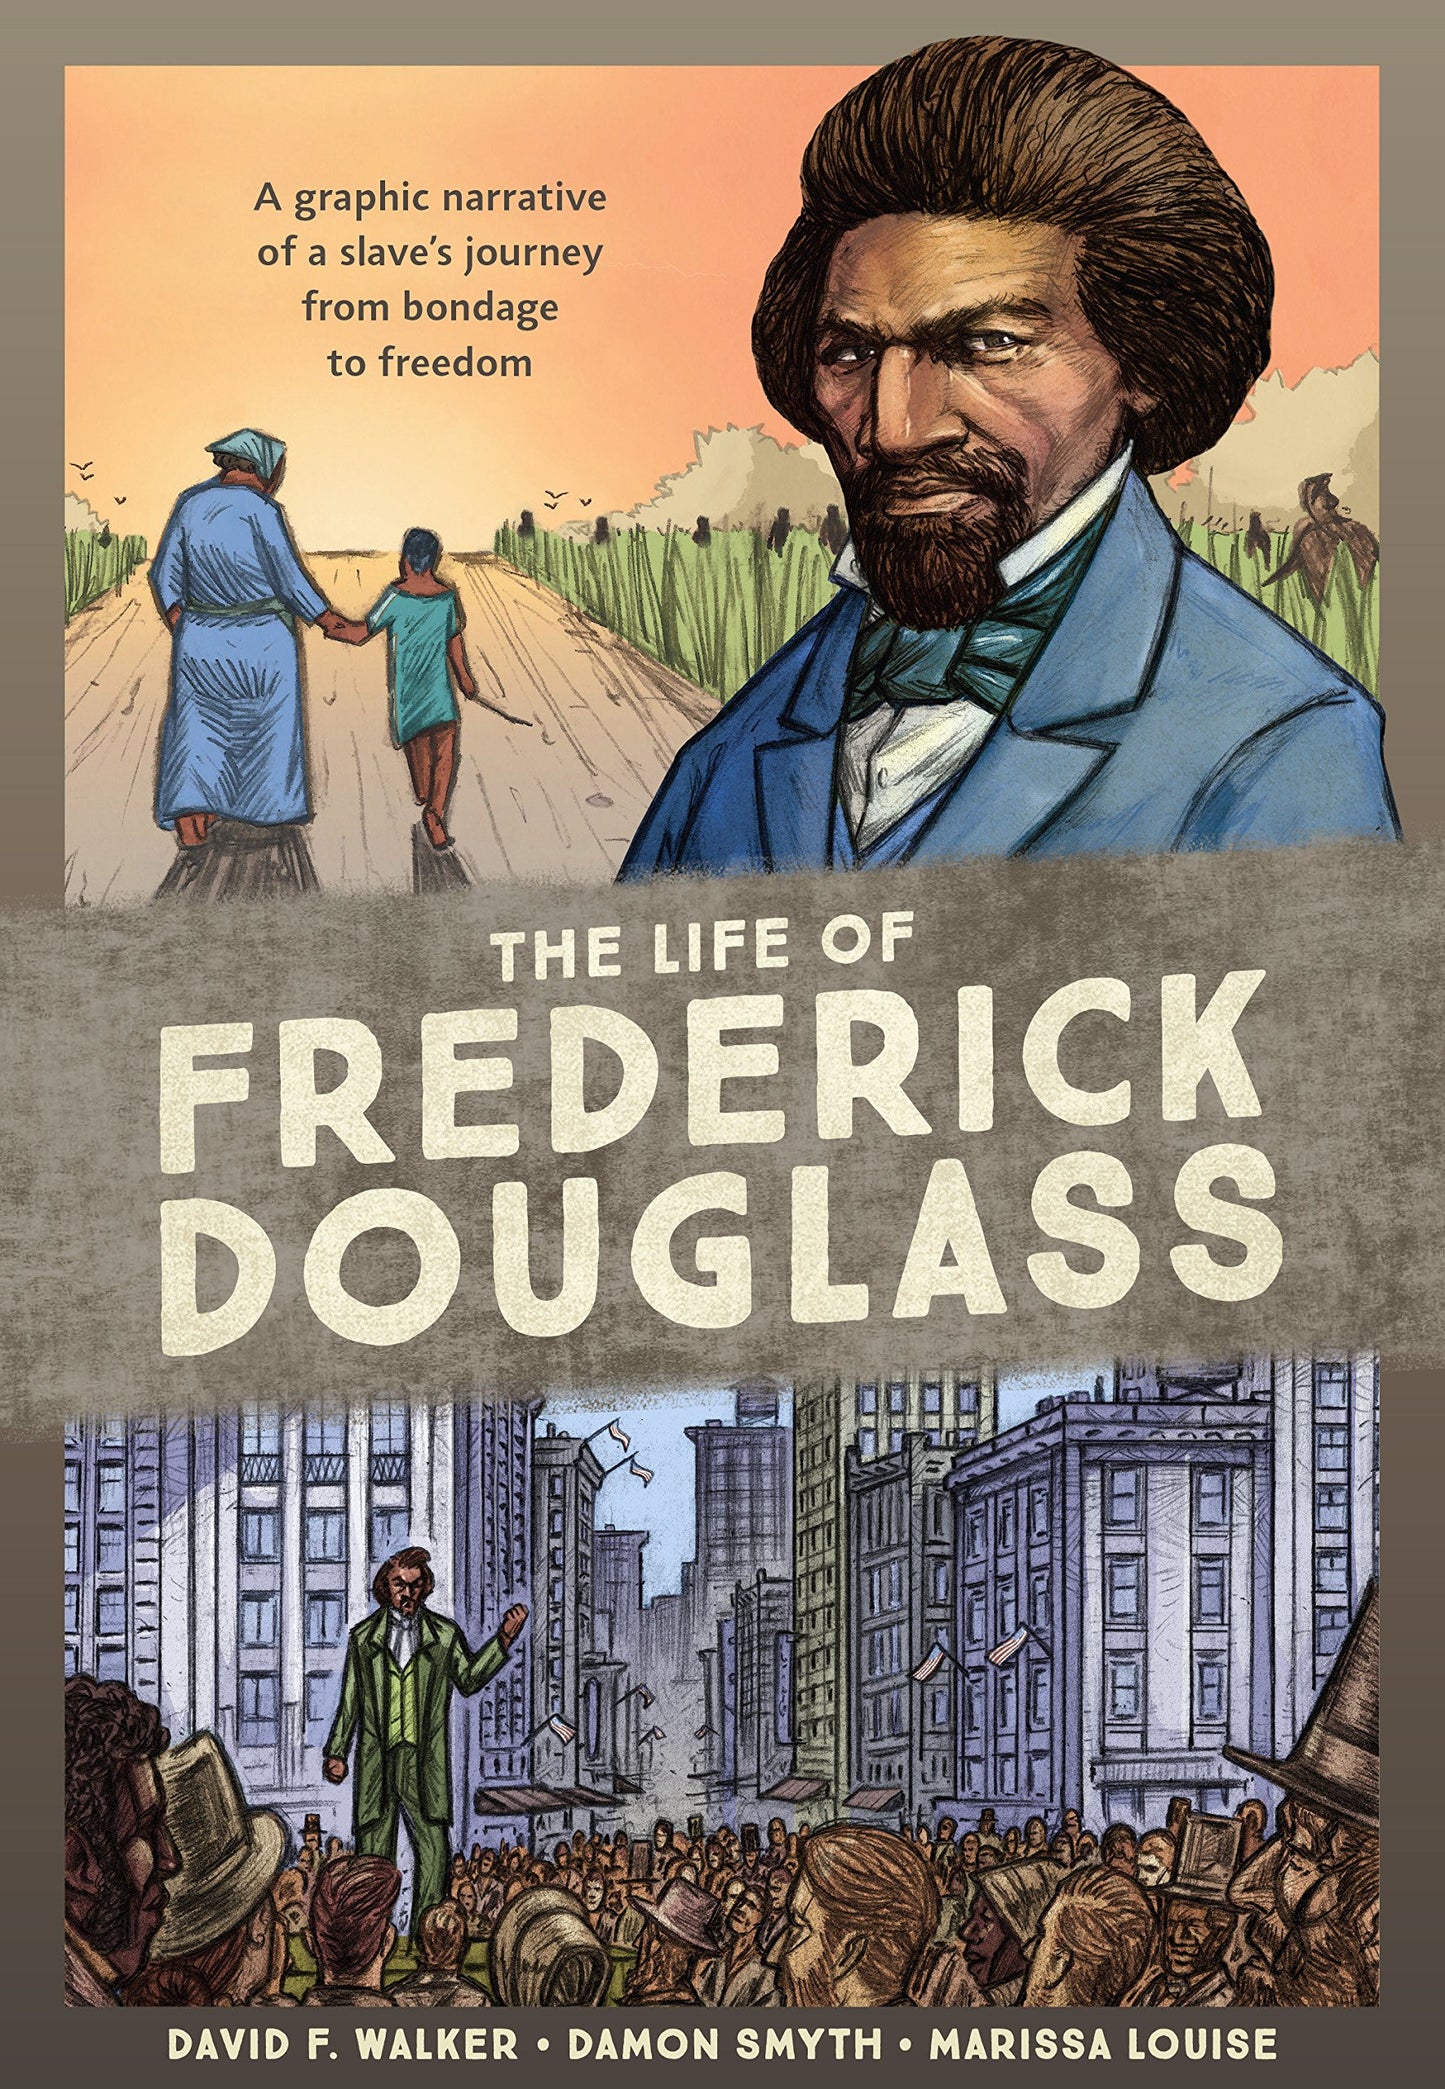 The Life of Frederick Douglass // A Graphic Narrative of a Slave's Journey from Bondage to Freedom